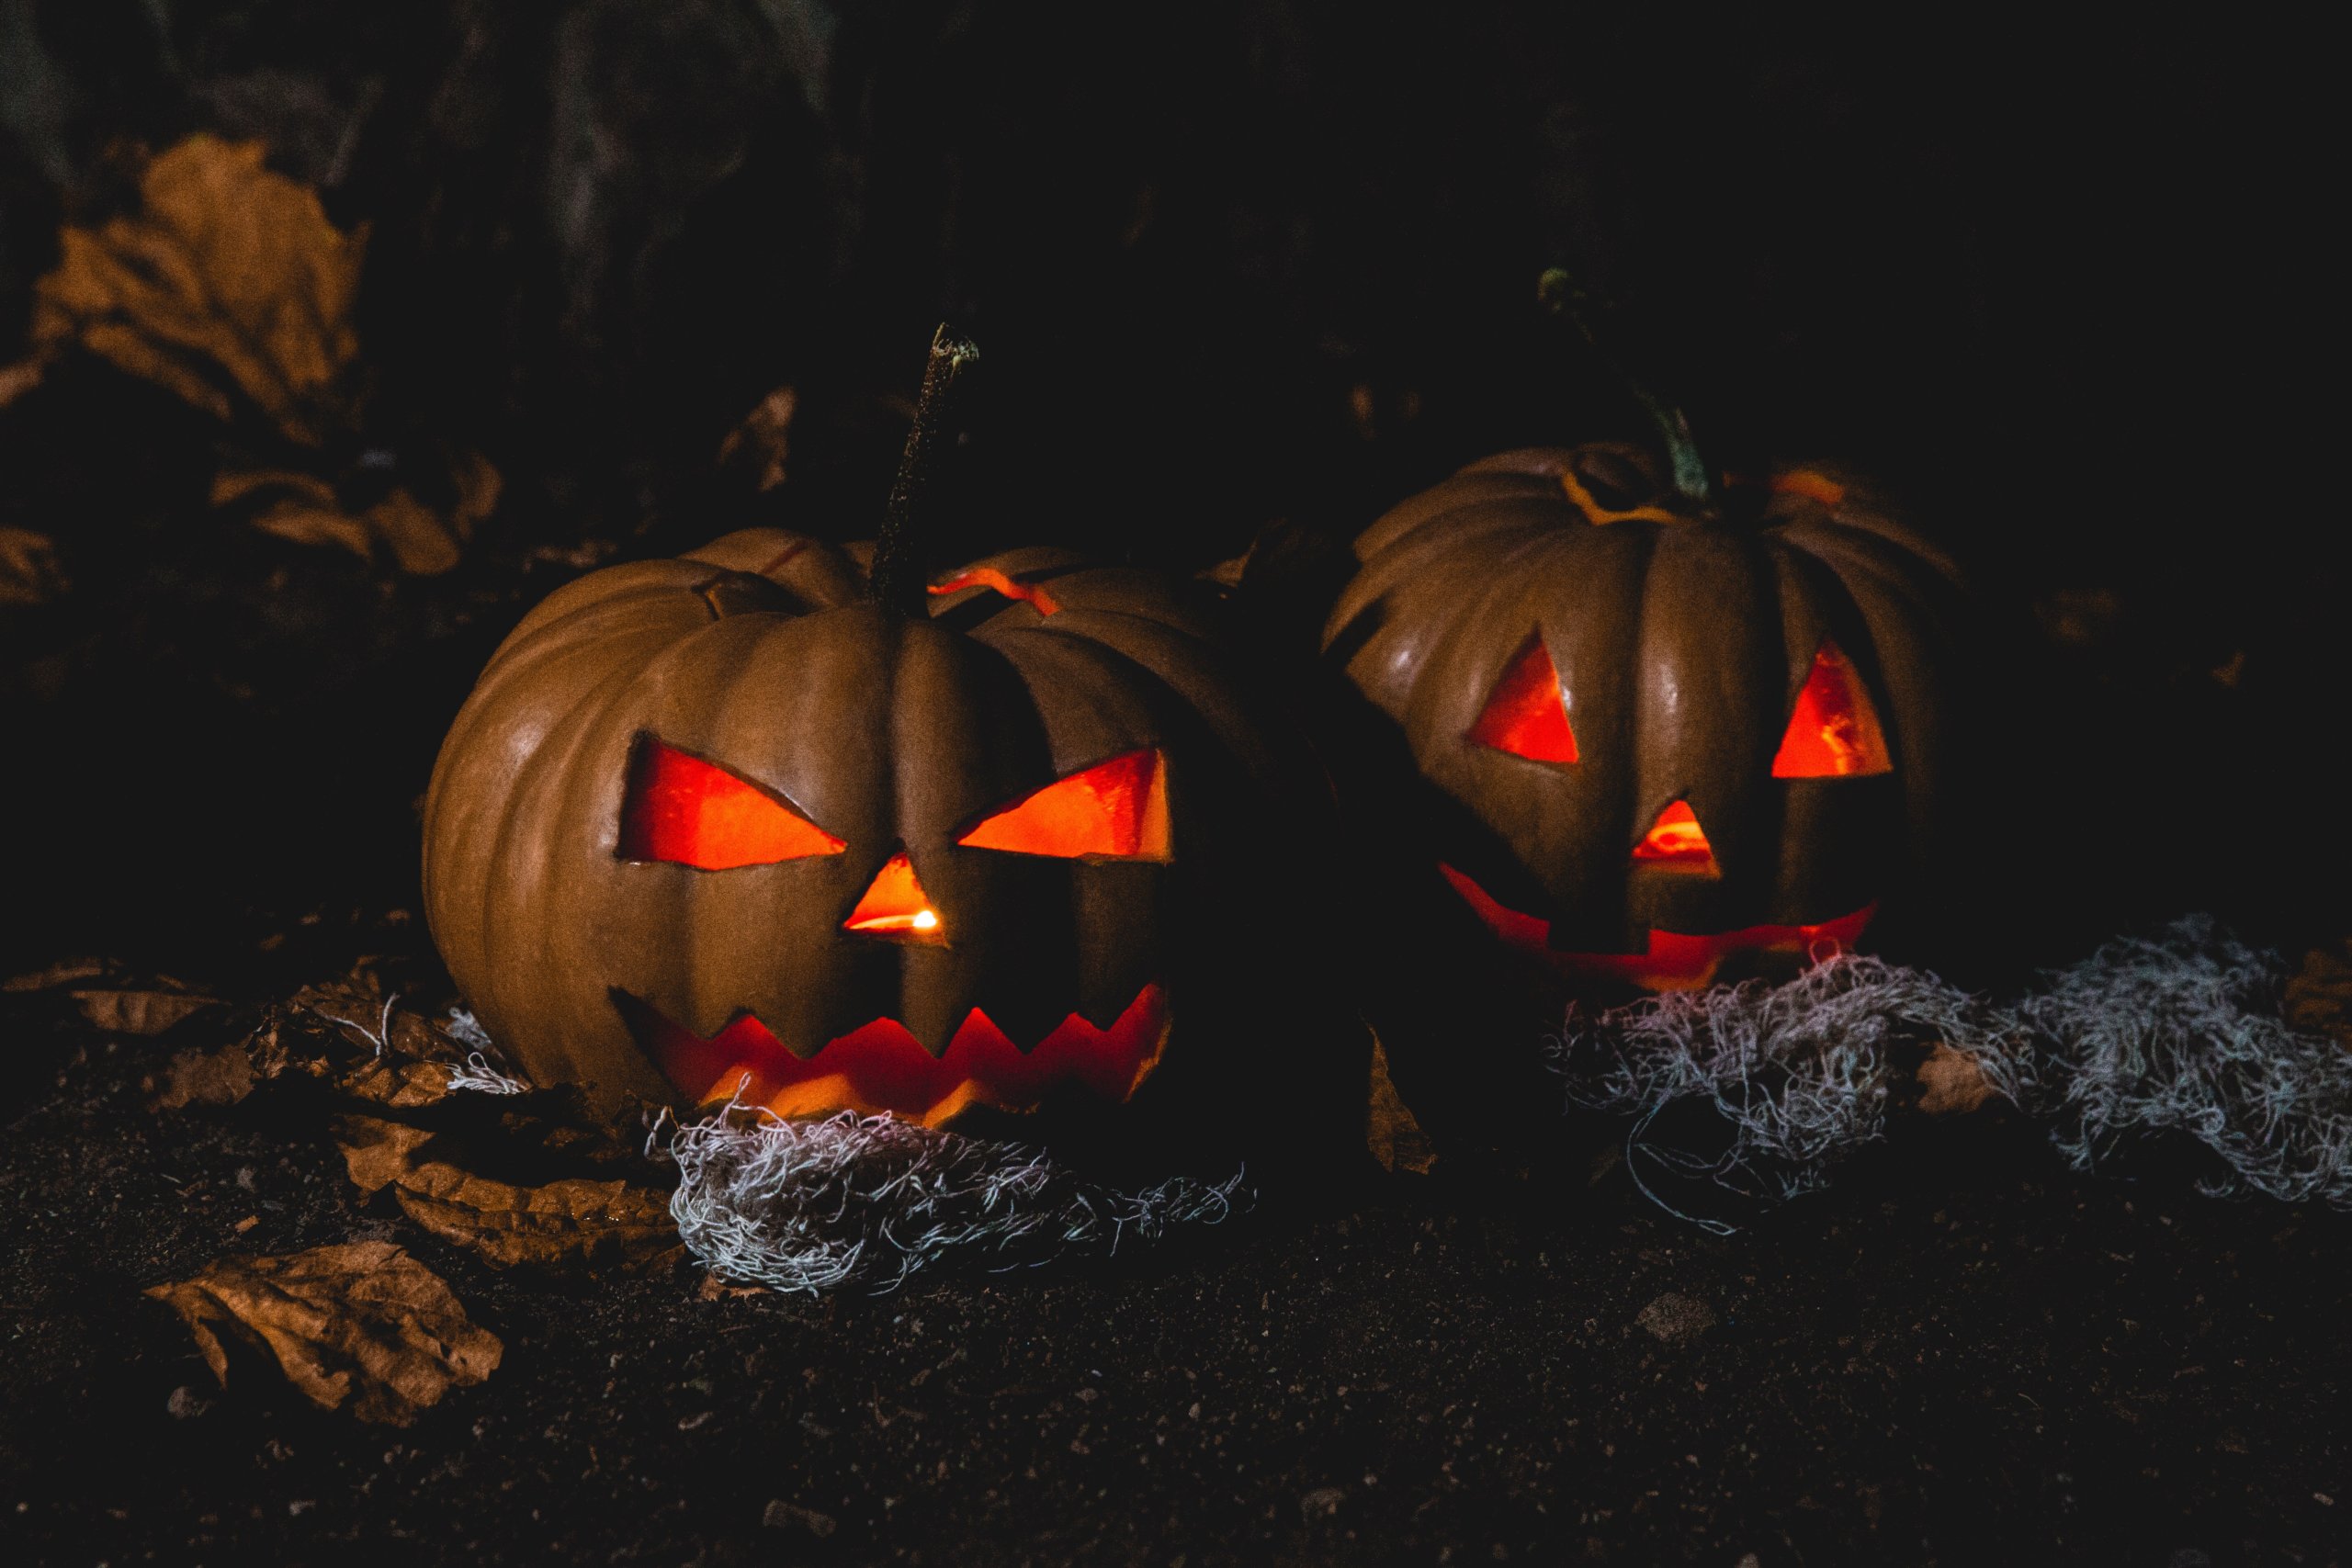 Pexels image of two orange pumpkins with black background. Pumpkins have triangle shapes as eyes and noses with orange light shining through and scary looks